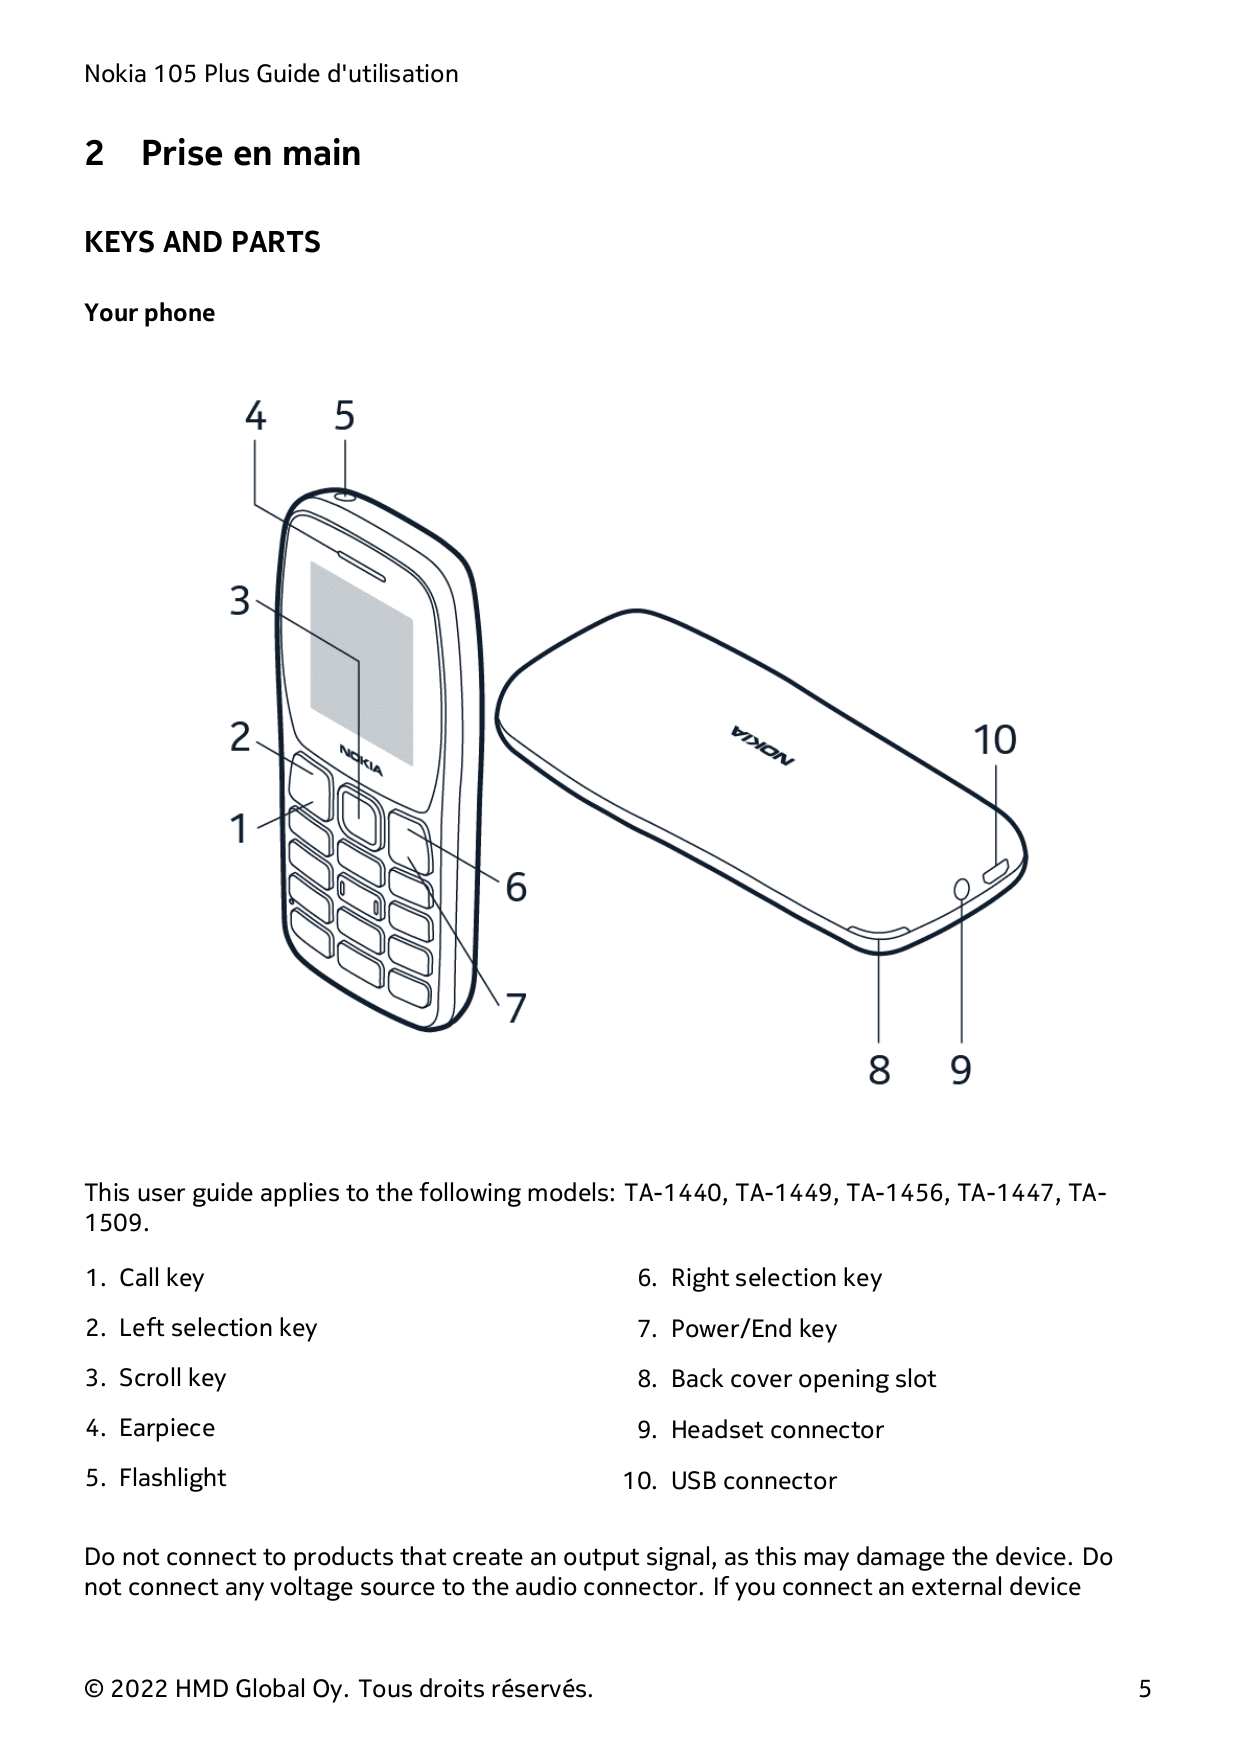 Nokia 105 Plus Guide d'utilisation2Prise en mainKEYS AND PARTSYour phoneThis user guide applies to the following models: TA-1440